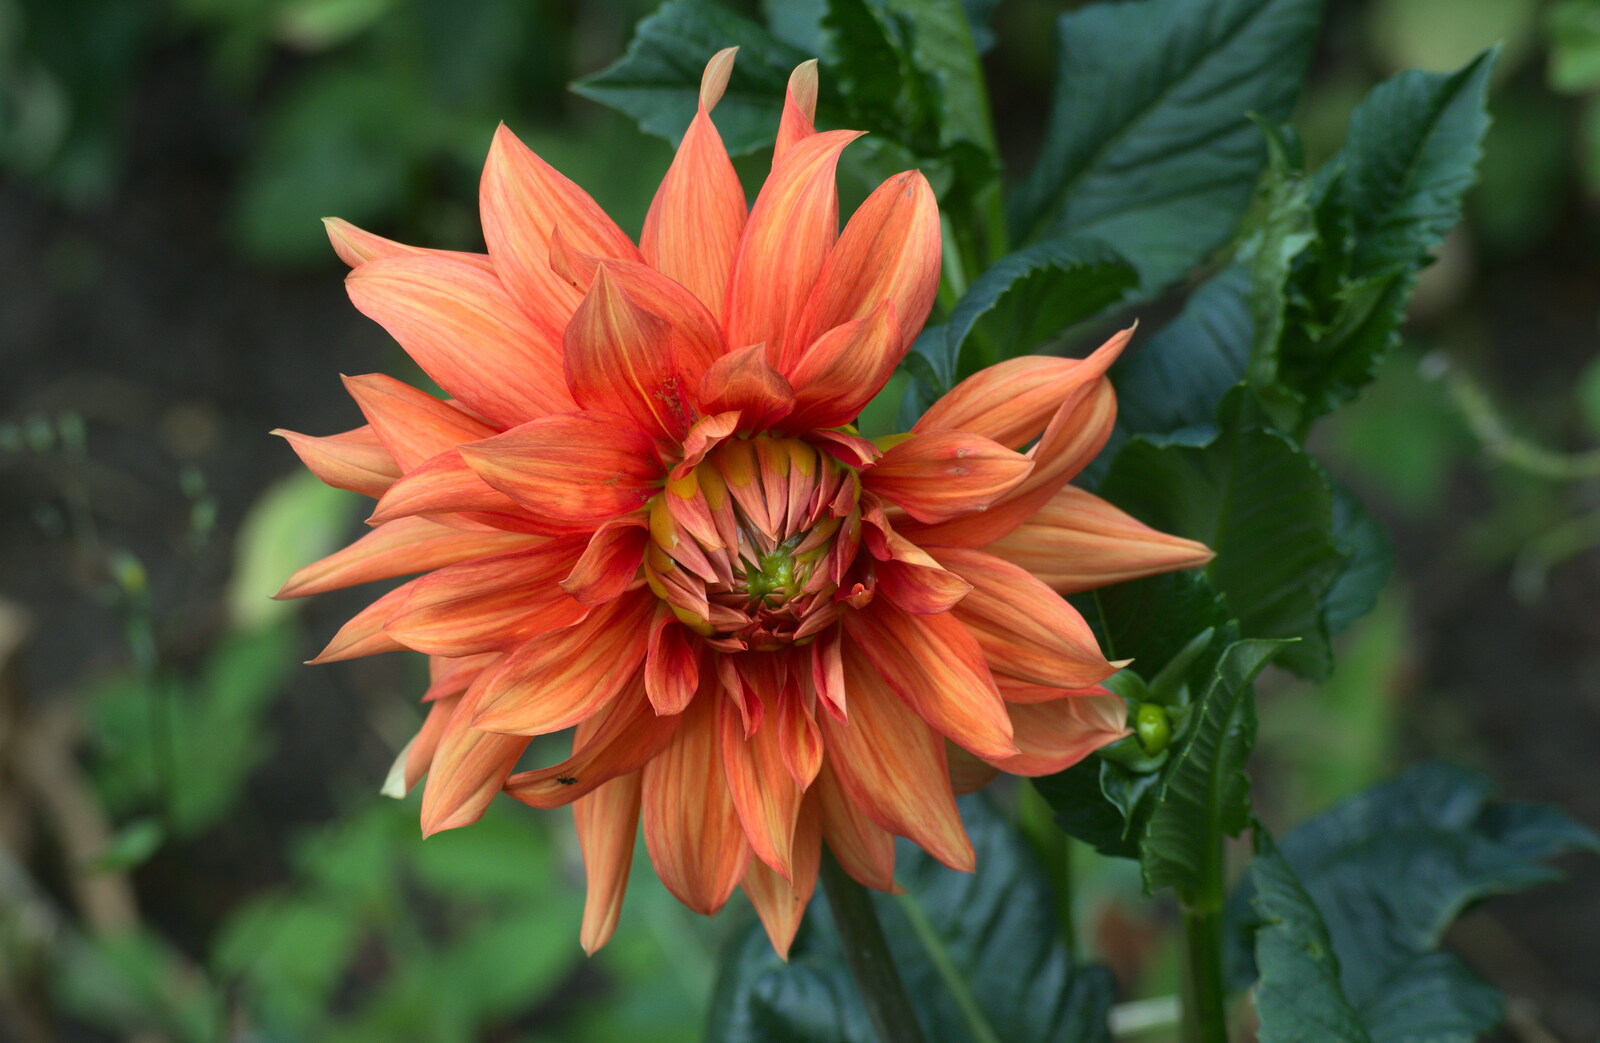 A deep orange dahlia from An Interview with Rick Wakeman and Other Stories, Diss, Norfolk - 22nd July 2013